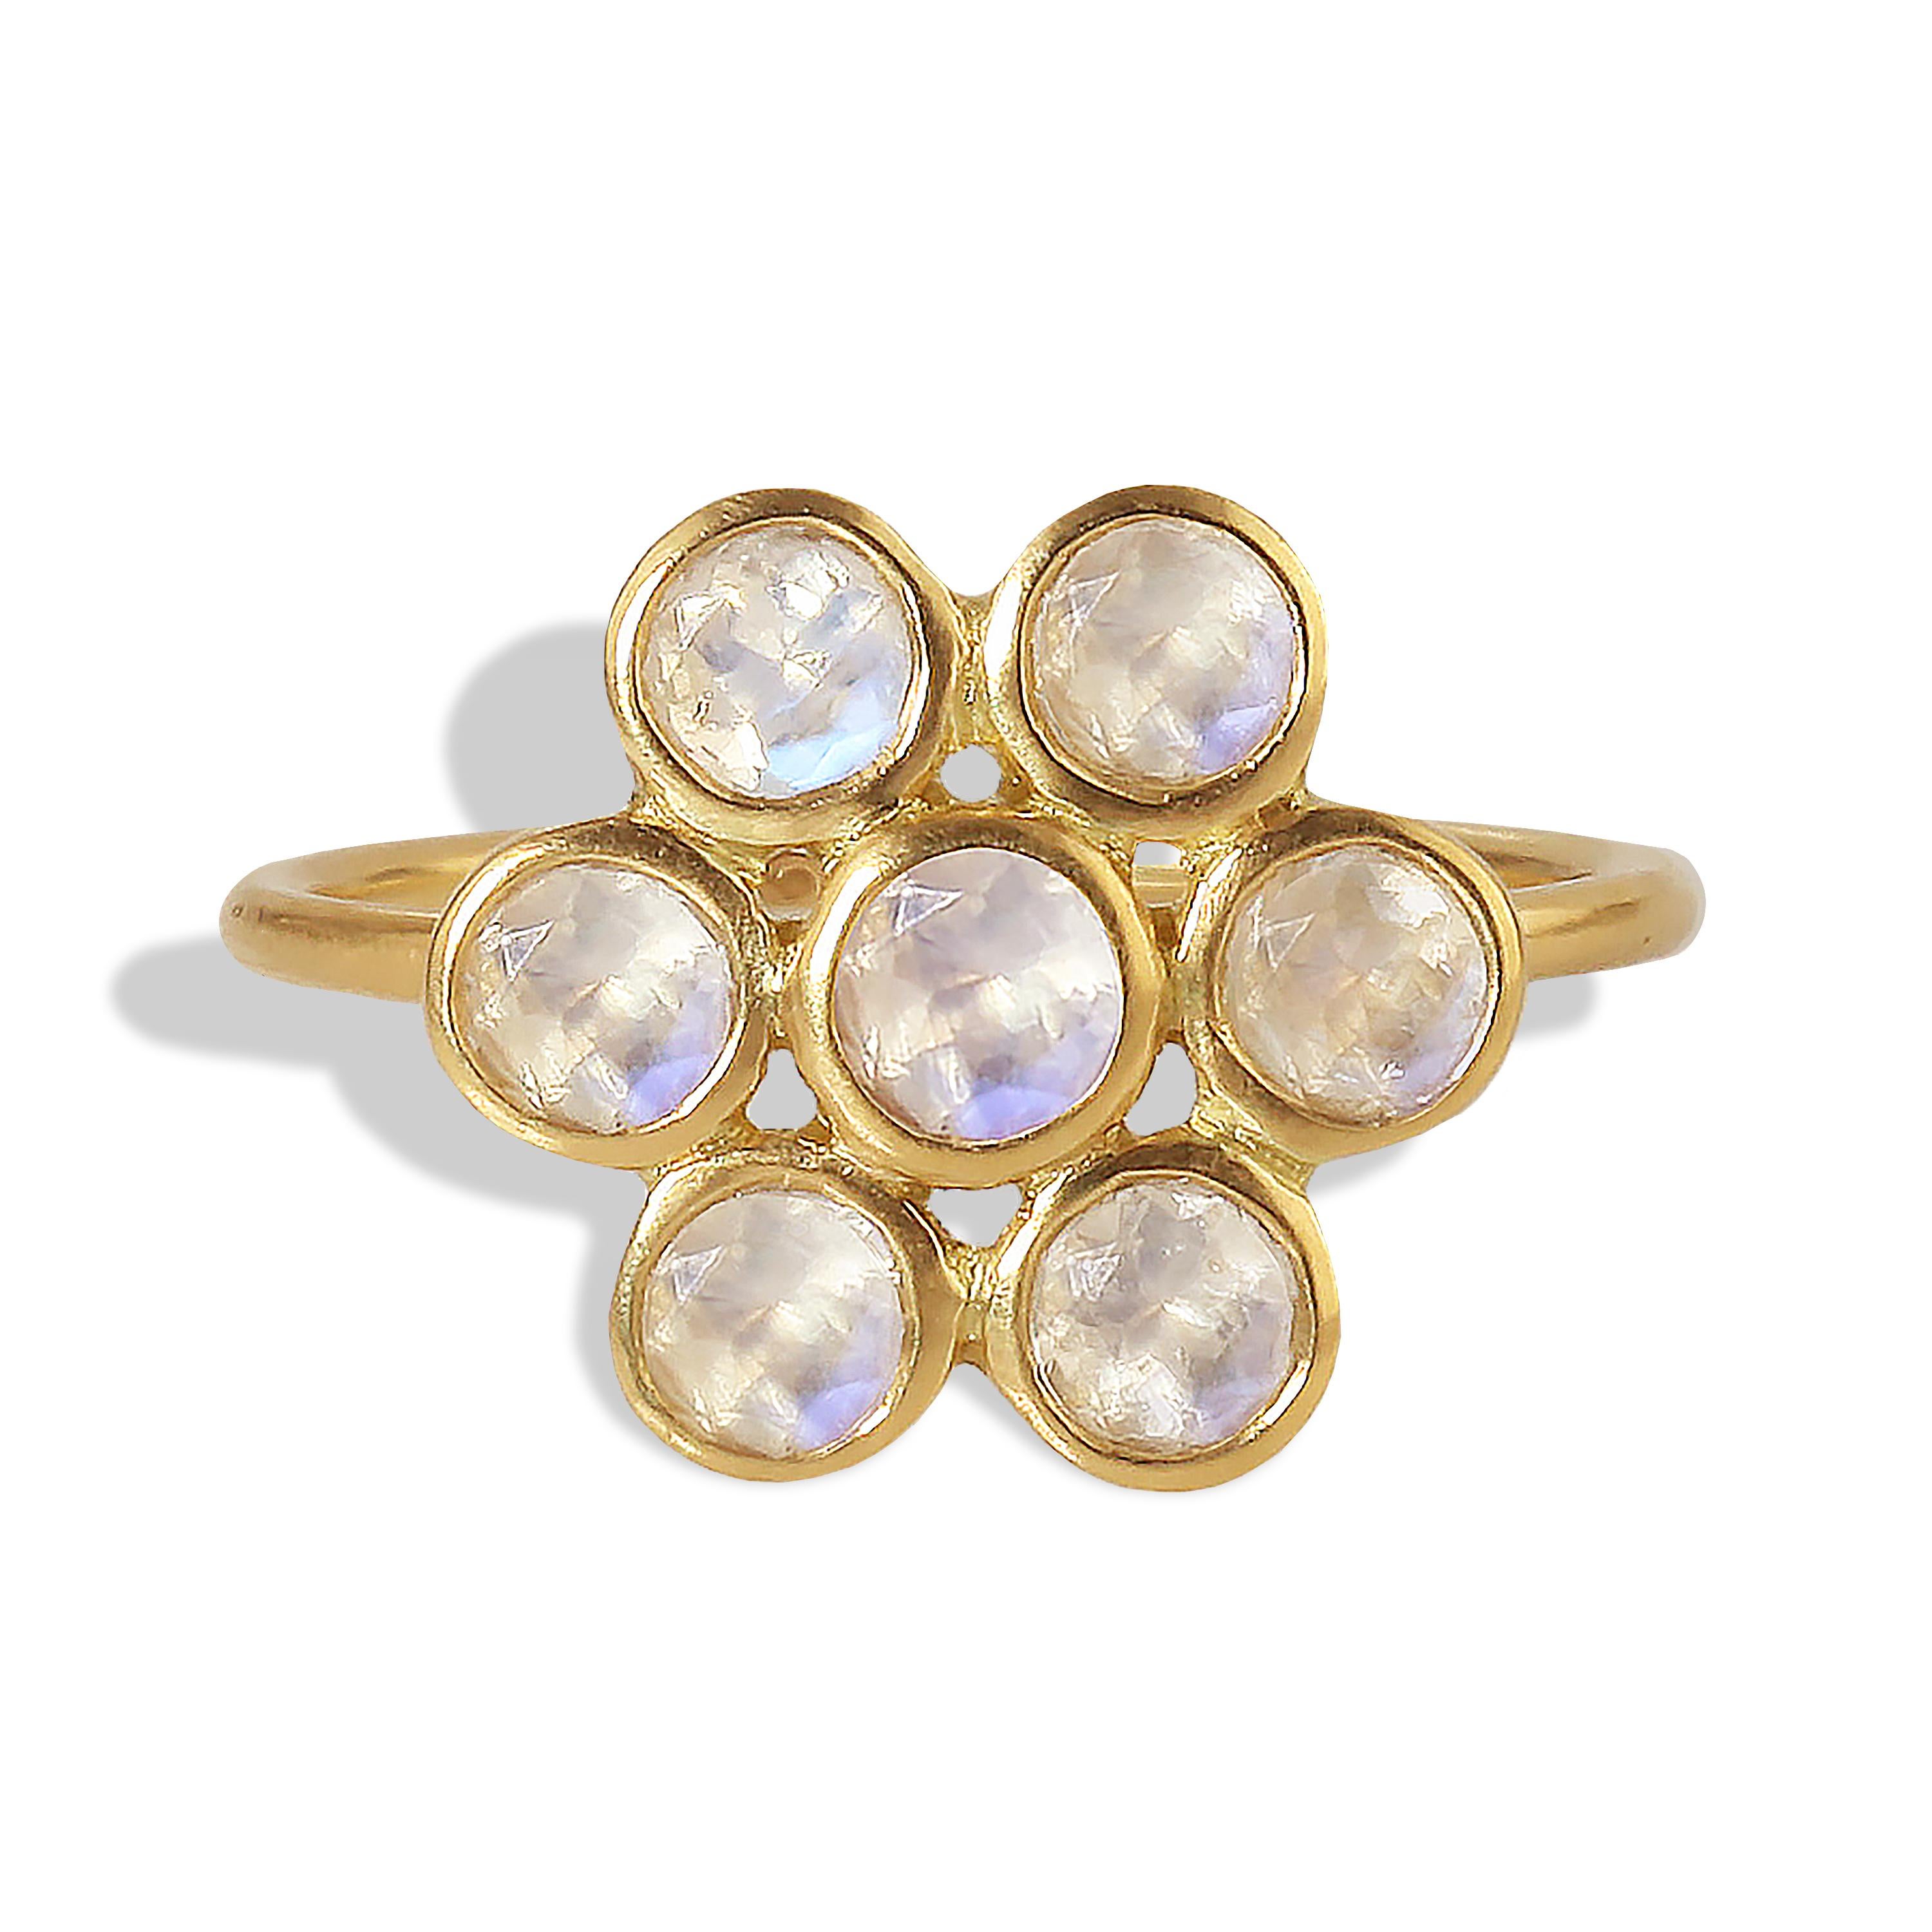 This delicate ring features 1.2 carats of faceted Rainbow Moonstone set in 20k matte yellow gold.

Moonstone is the sacred stone of India. According to other legends,  Moonstone can give gifts of prophecy and clairvoyance to the wearer. It could